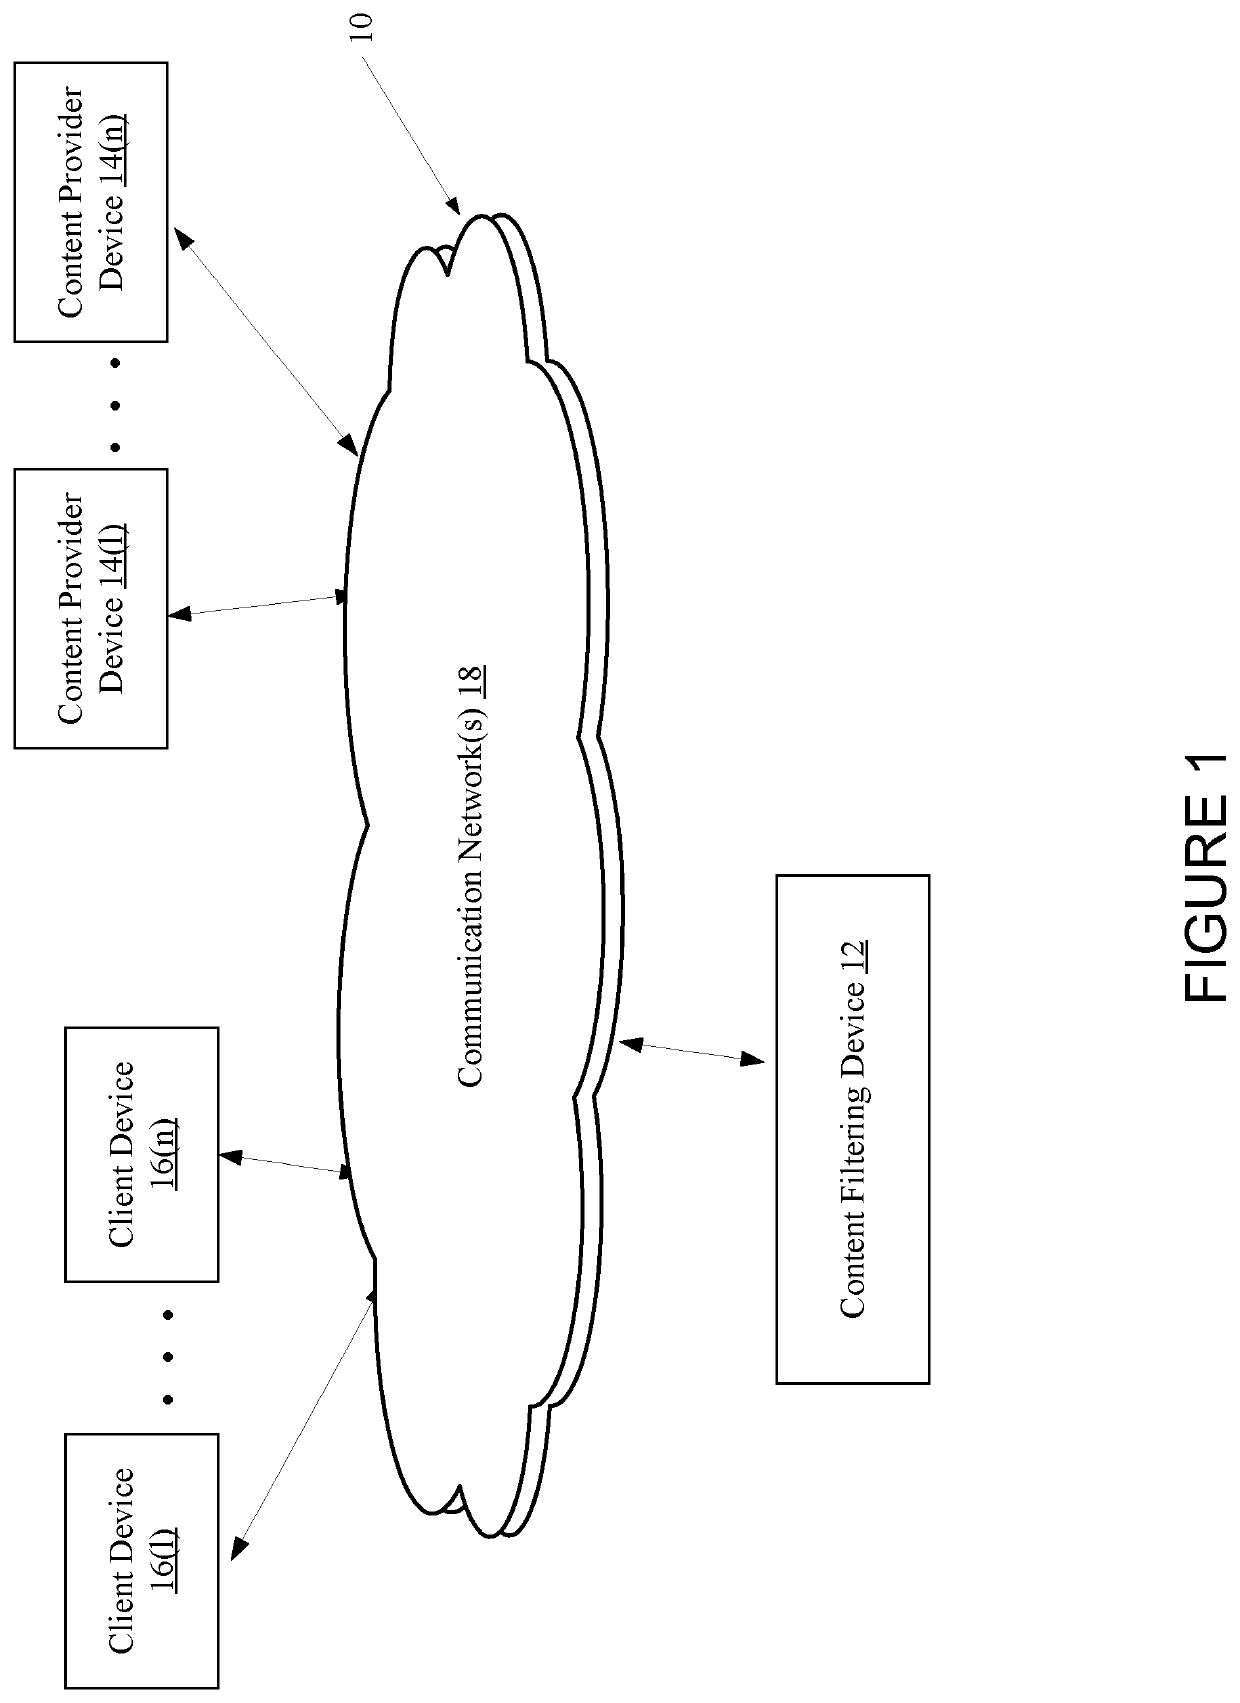 Systems and methods for content filtering of publications